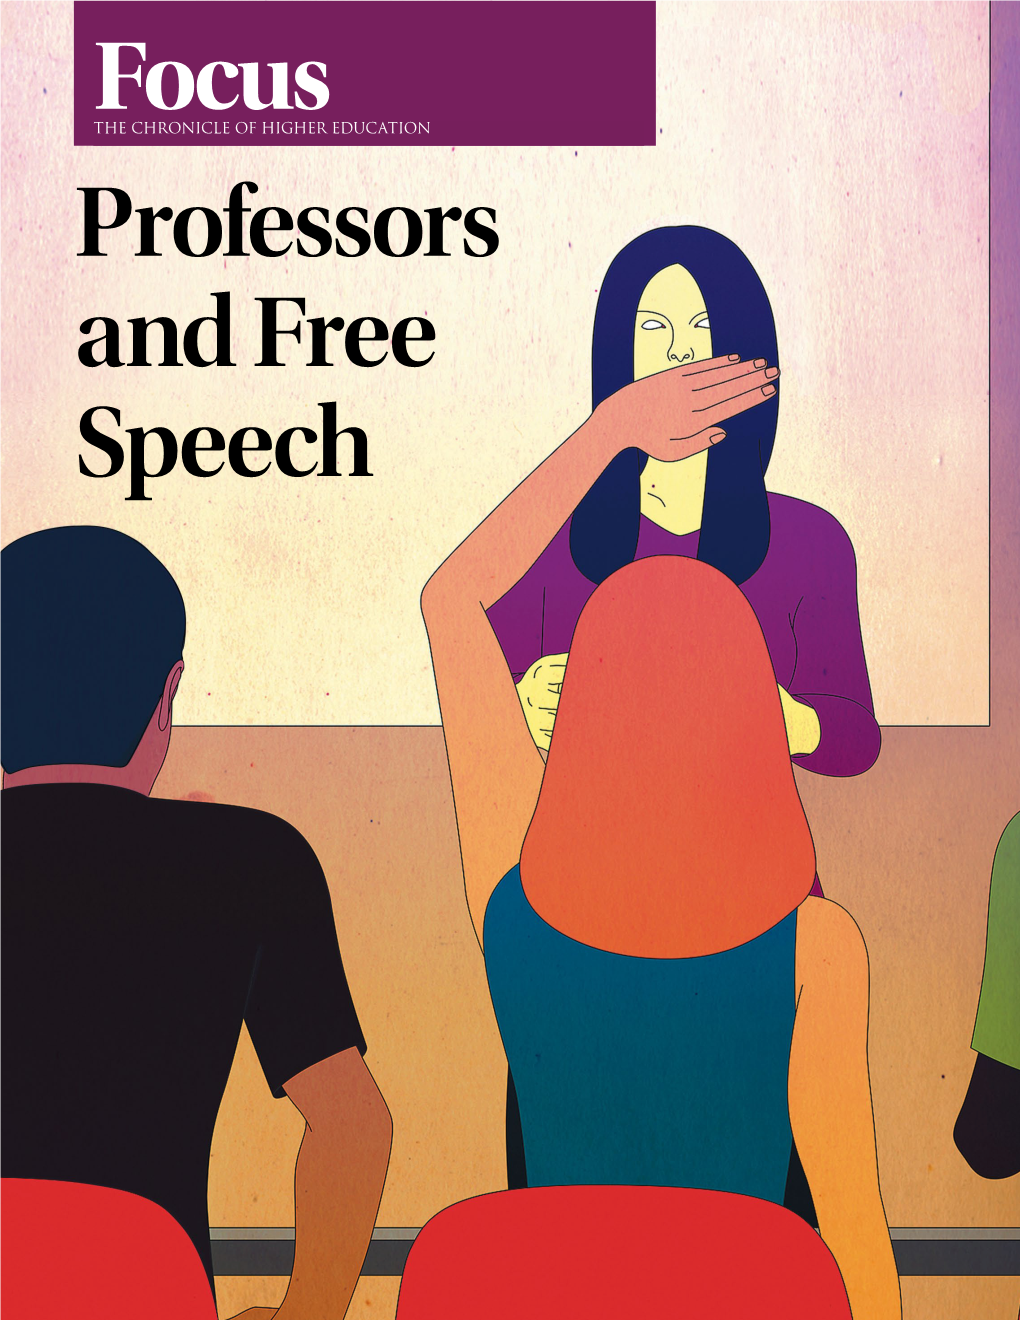 Professors and Free Speech As a Chronicle of Higher Education Individual Subscriber, You Receive Premium, Unrestricted Access to the Entire Chronicle Focus Collection